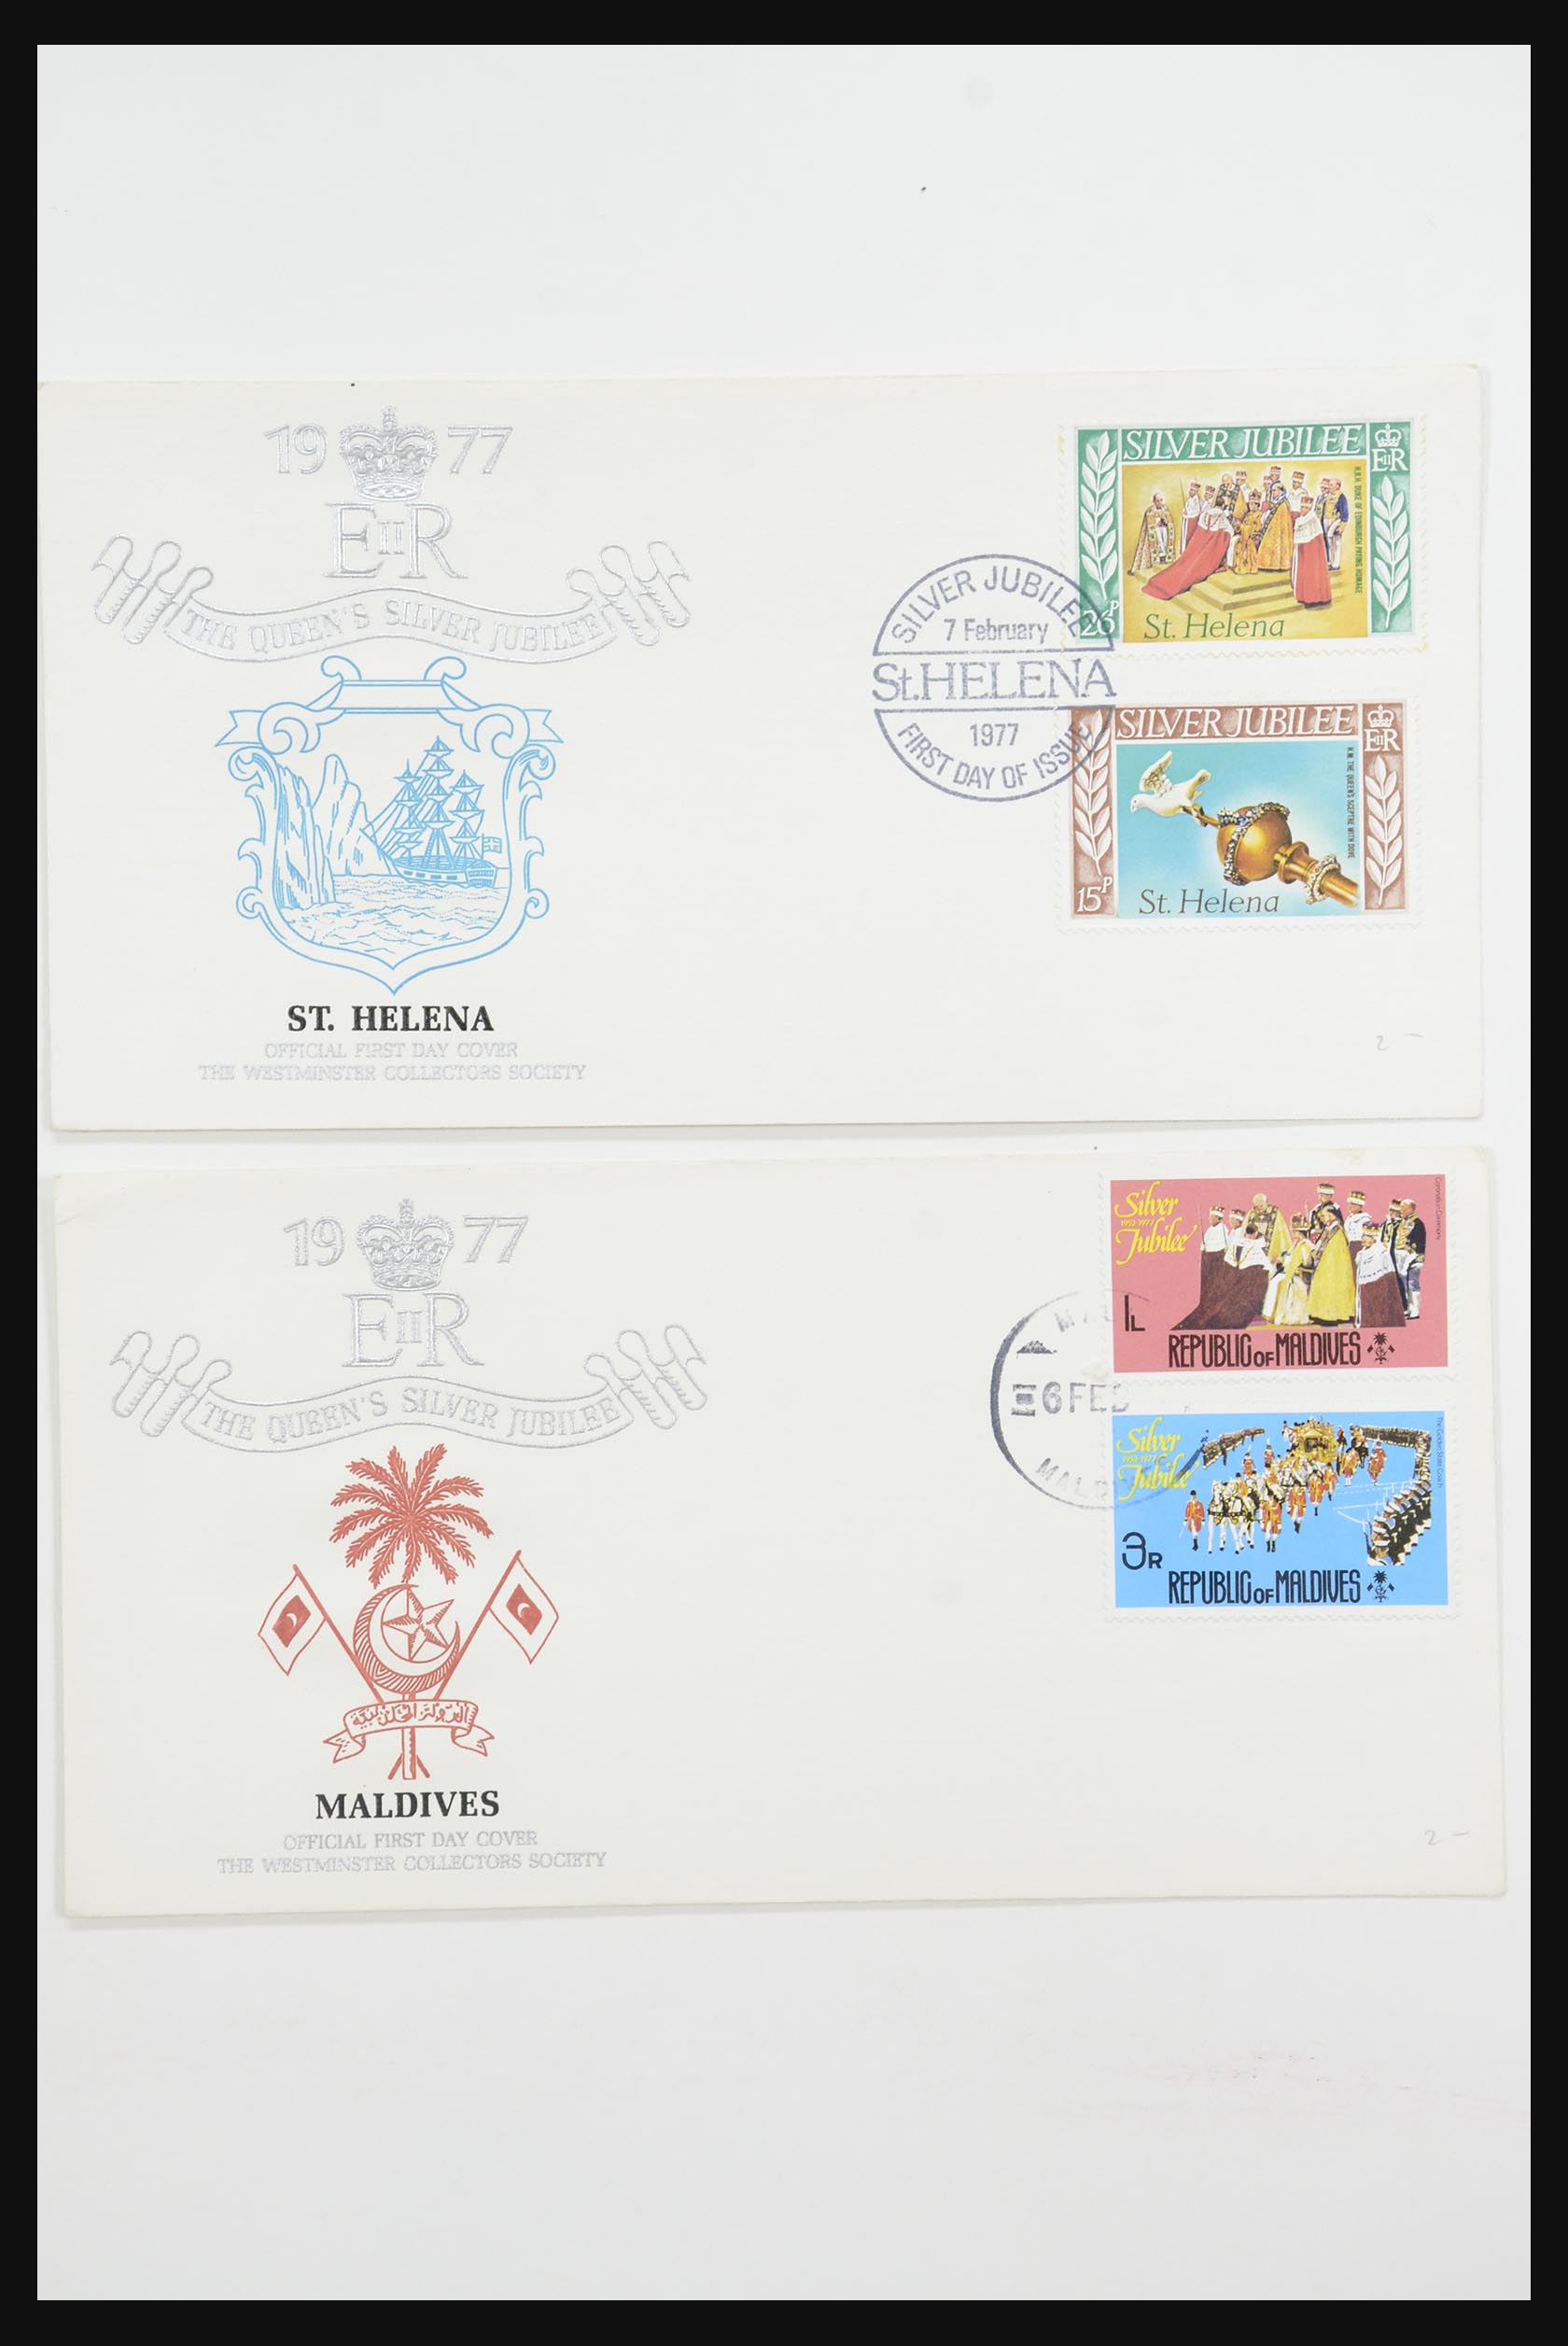 31726 071 - 31726 Great Britain and colonies covers and FDC's 1937-2001.